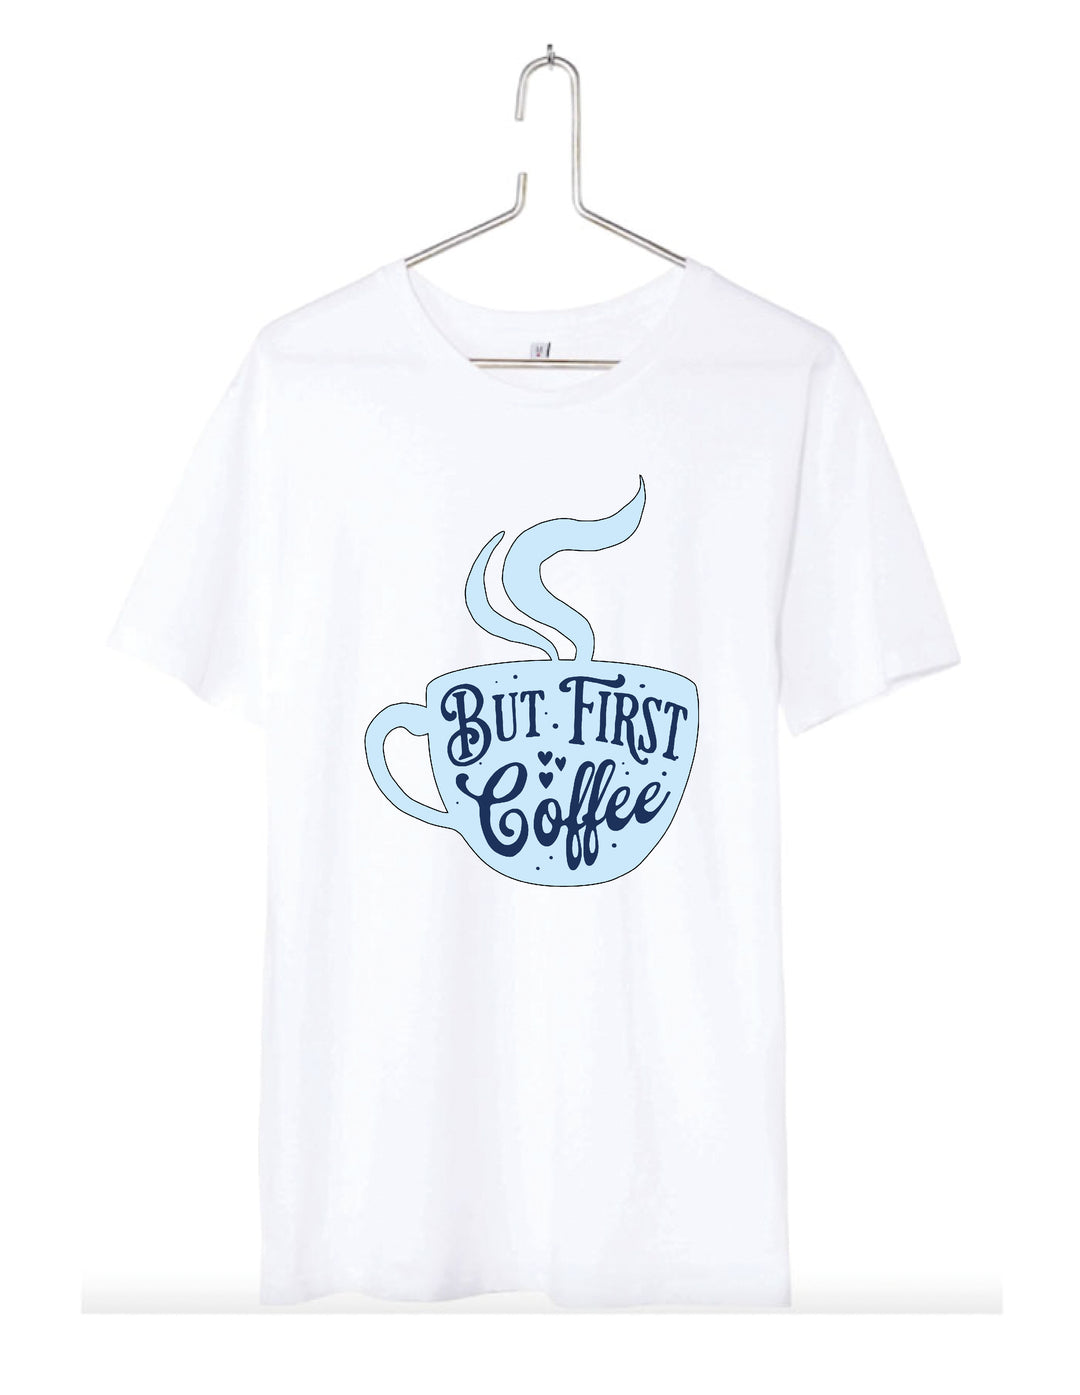 T-shirt homme But first coffee